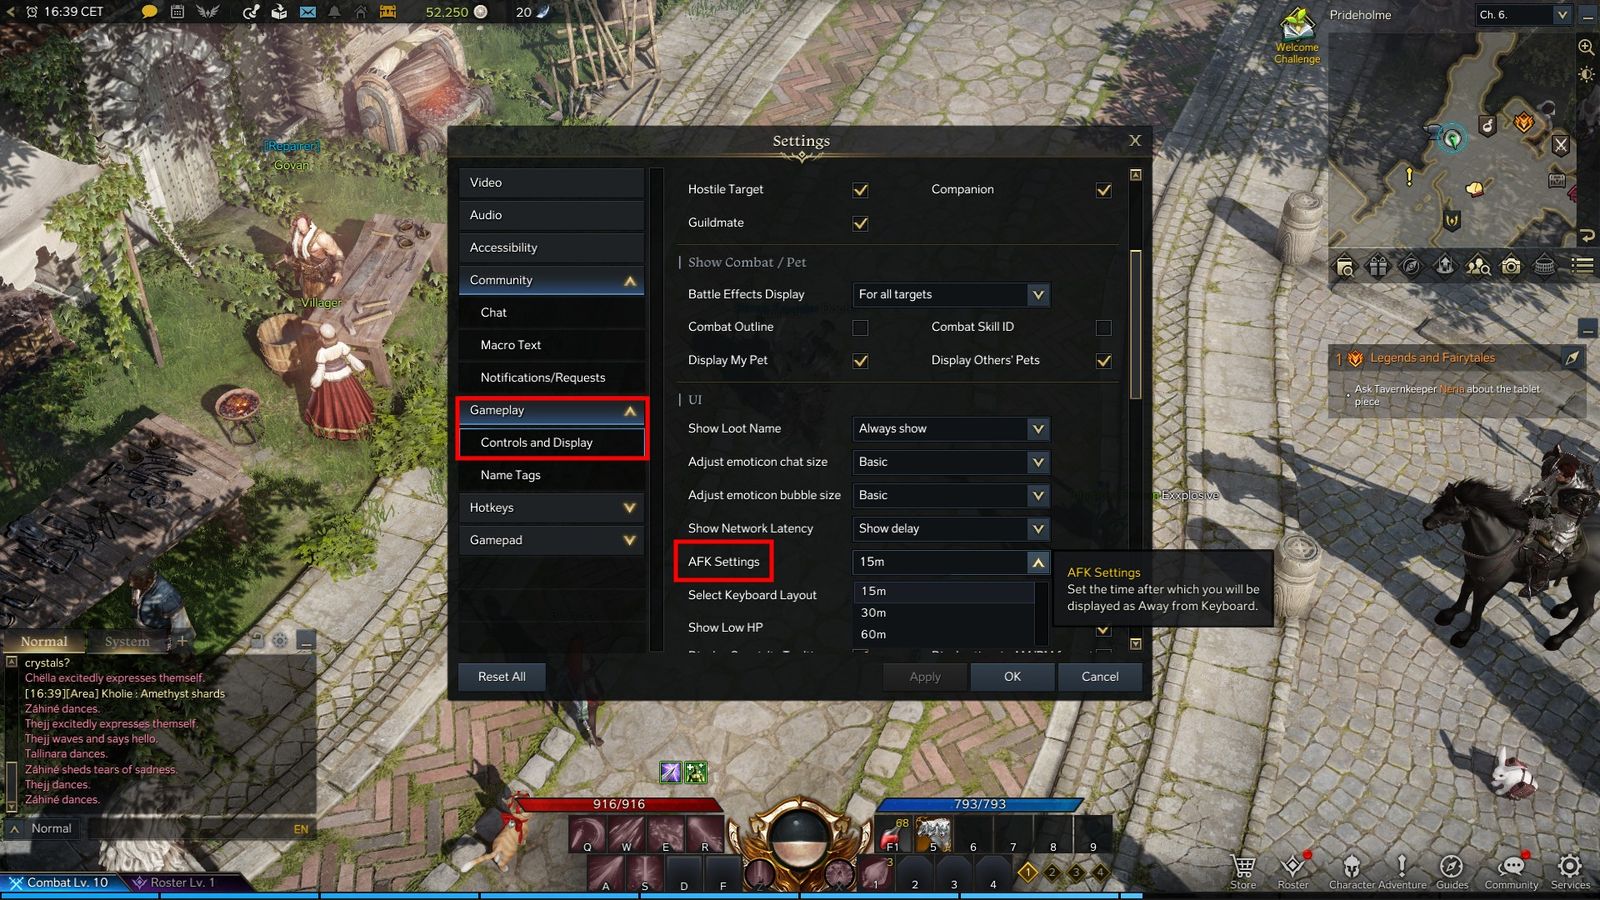 The Controls and Display Gameplay settings, where players can adjust their AFK Timer in Lost Ark.